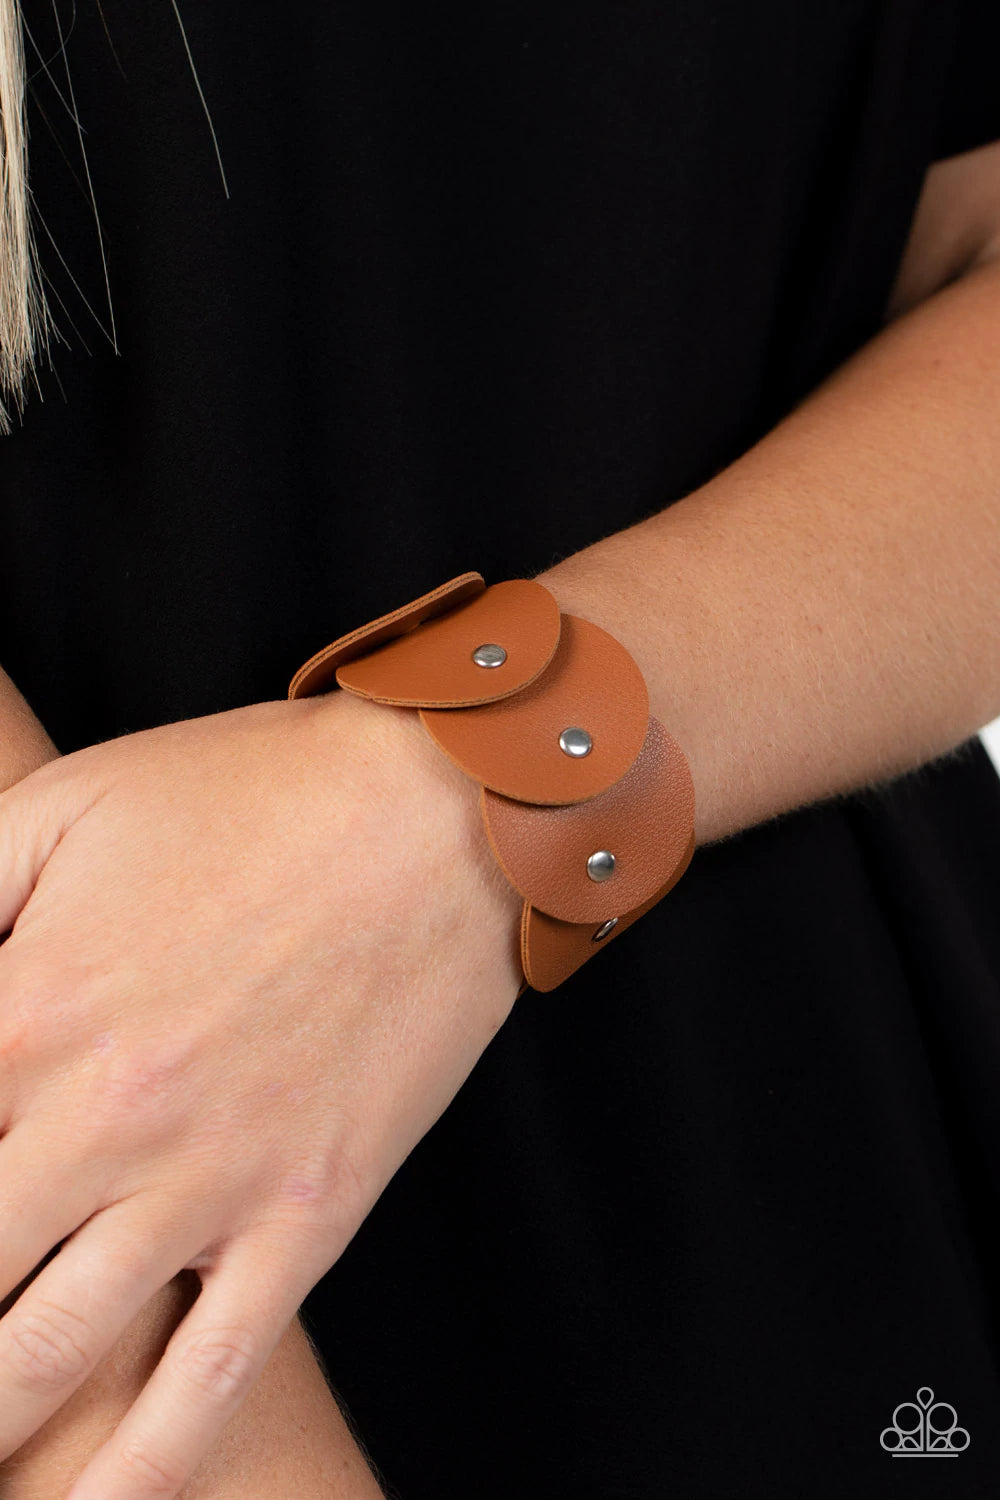 Paparazzi Accessories Rhapsodic Roundup - Brown Overlapping tan leather discs are studded in place around the wrist, resulting in a dizzying rustic centerpiece. Features an adjustable snap closure. Sold as one individual bracelet. Jewelry